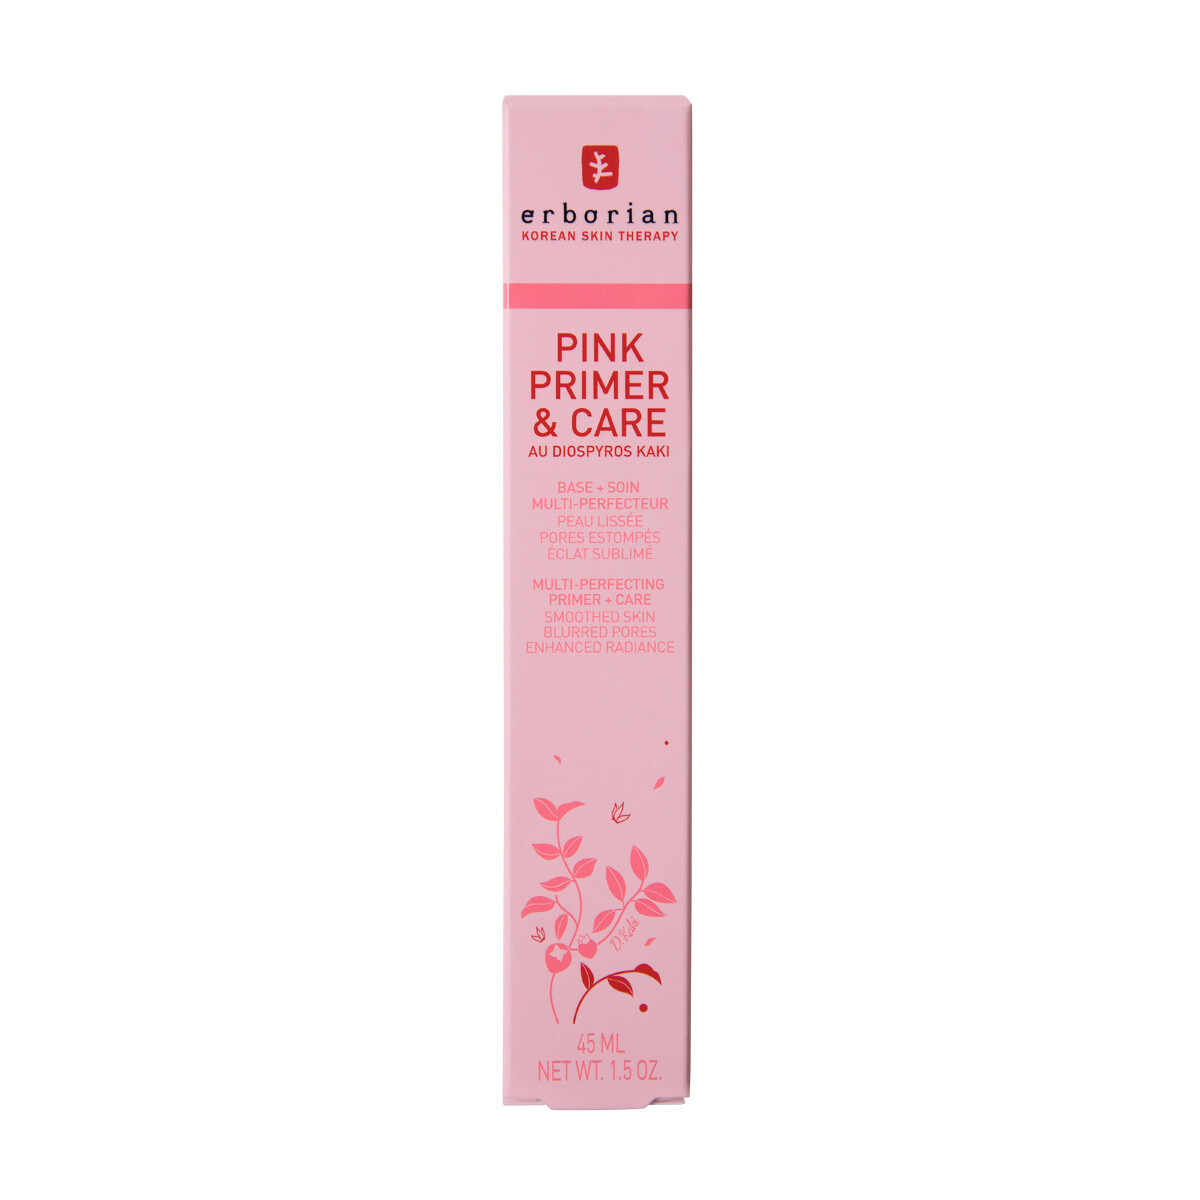 Pink Primer & Care - Primer perfezionatore 4 in1, Rosa, large image number 1